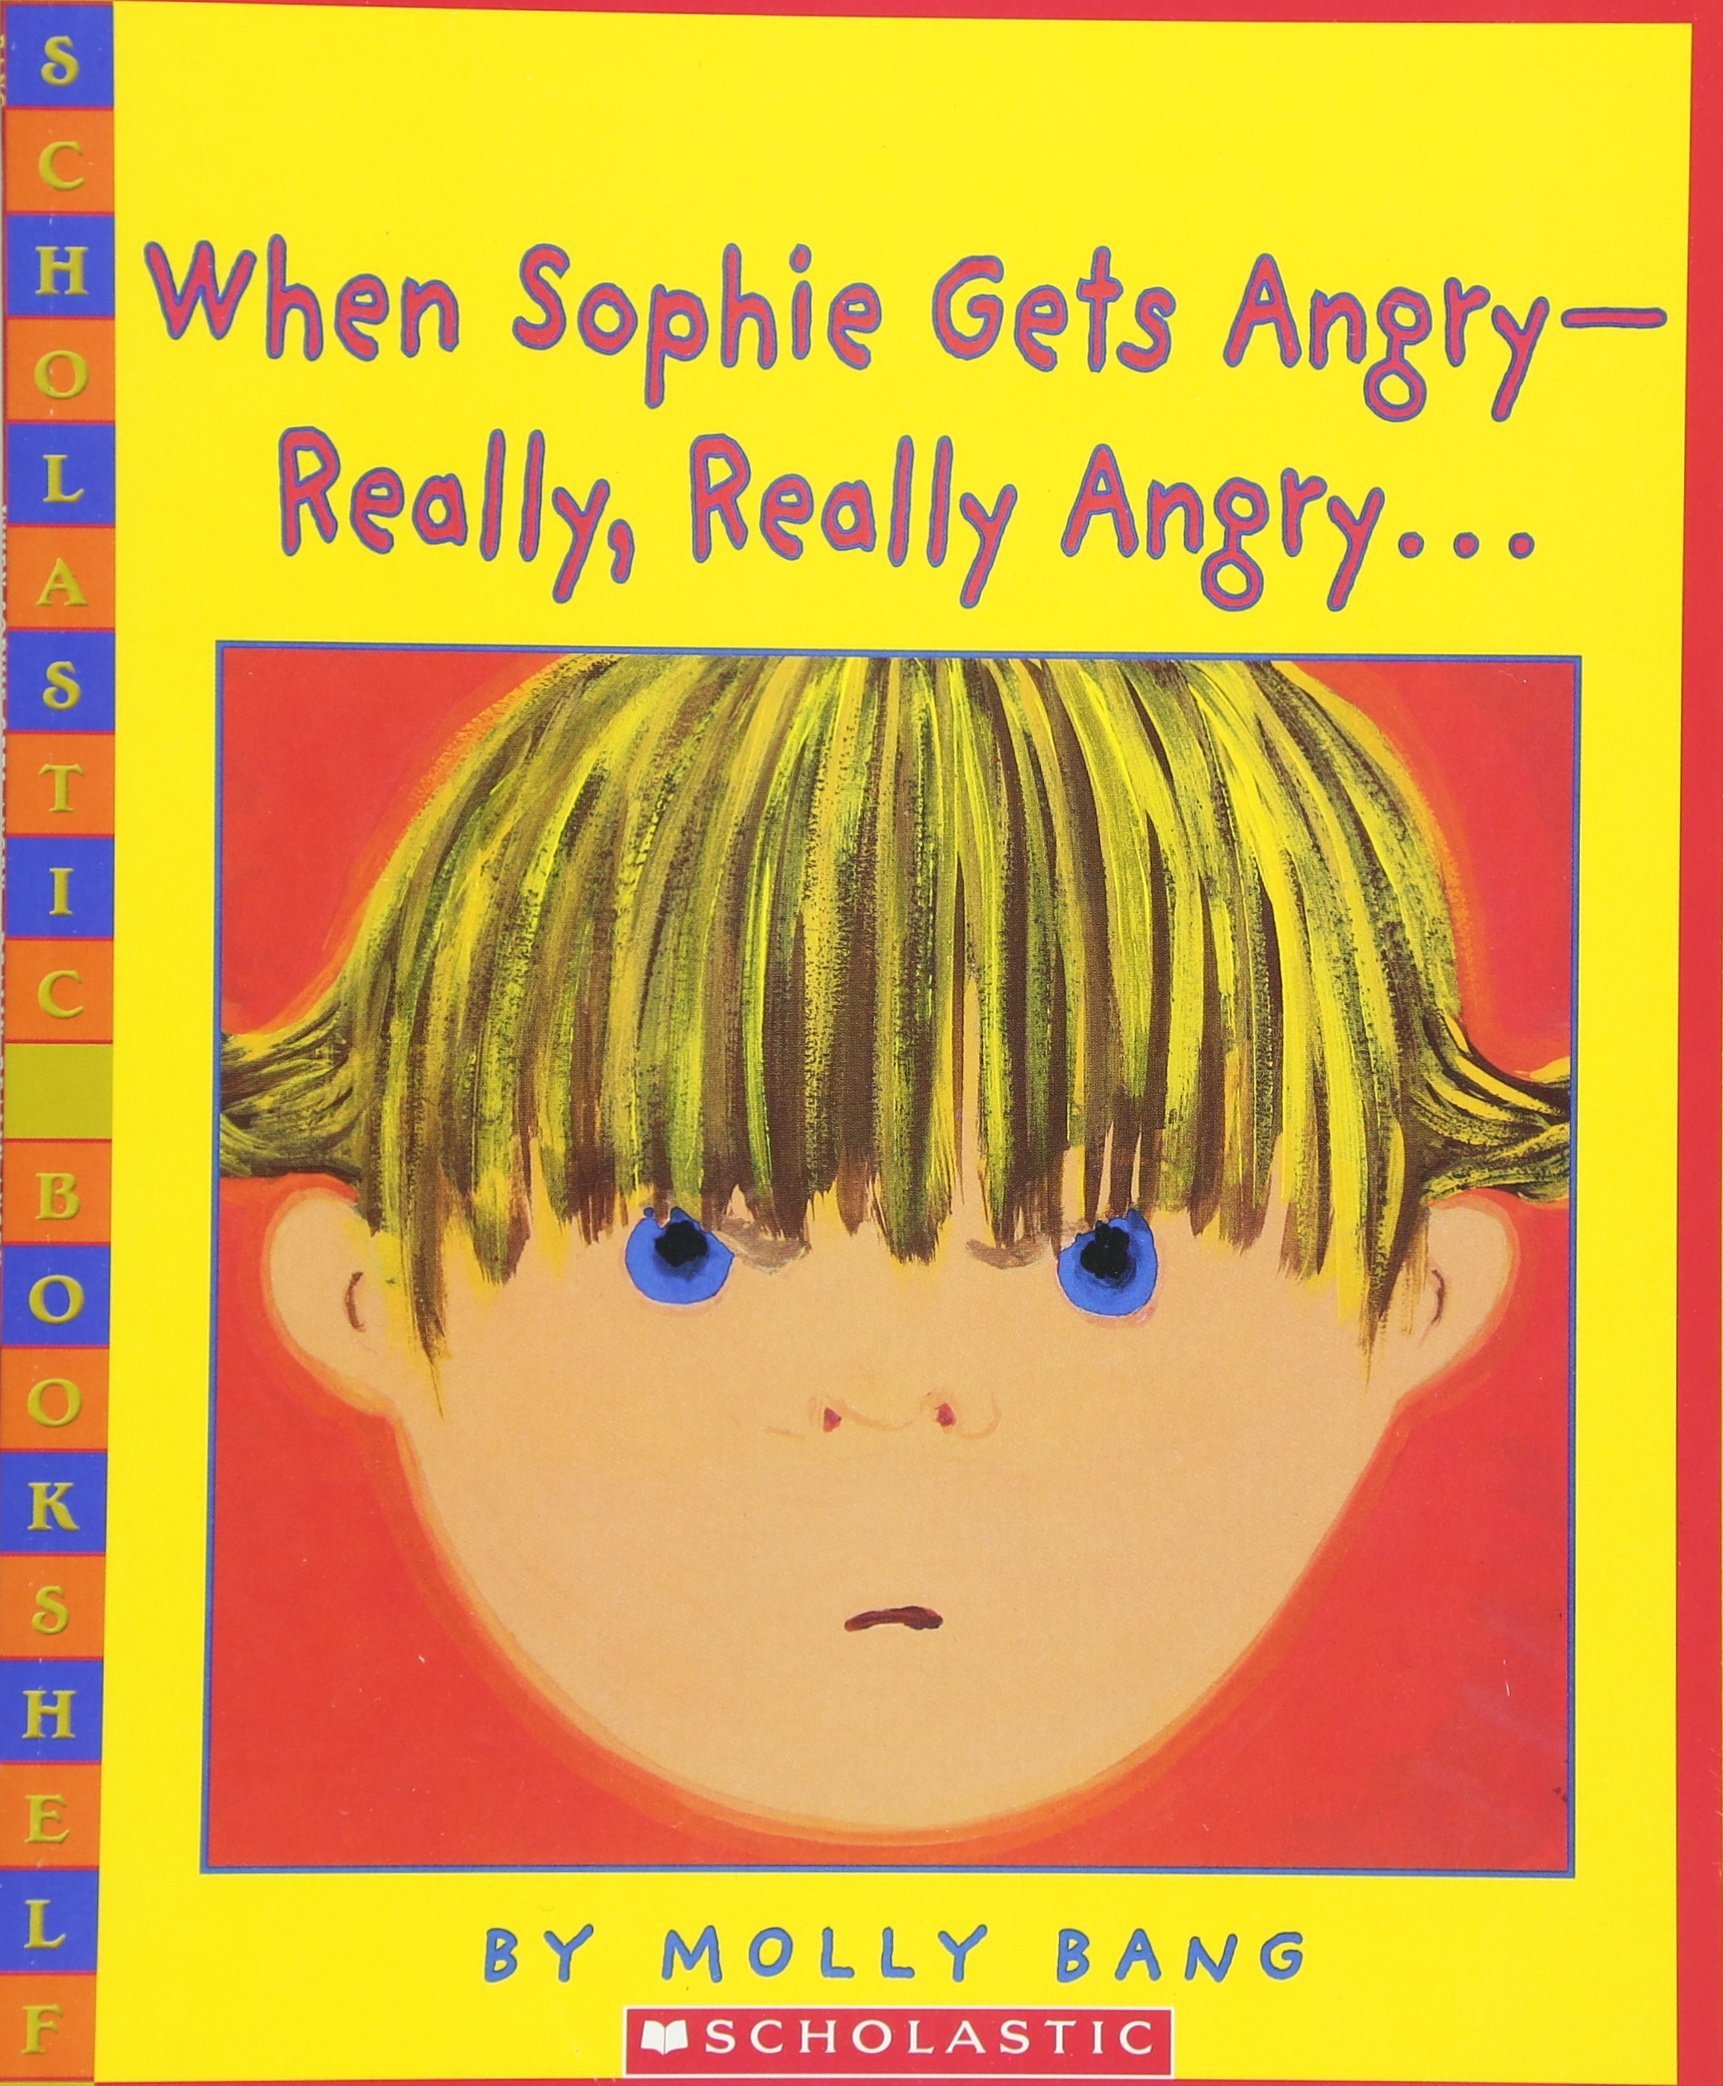 When Sophie Gets Angry.jpeg